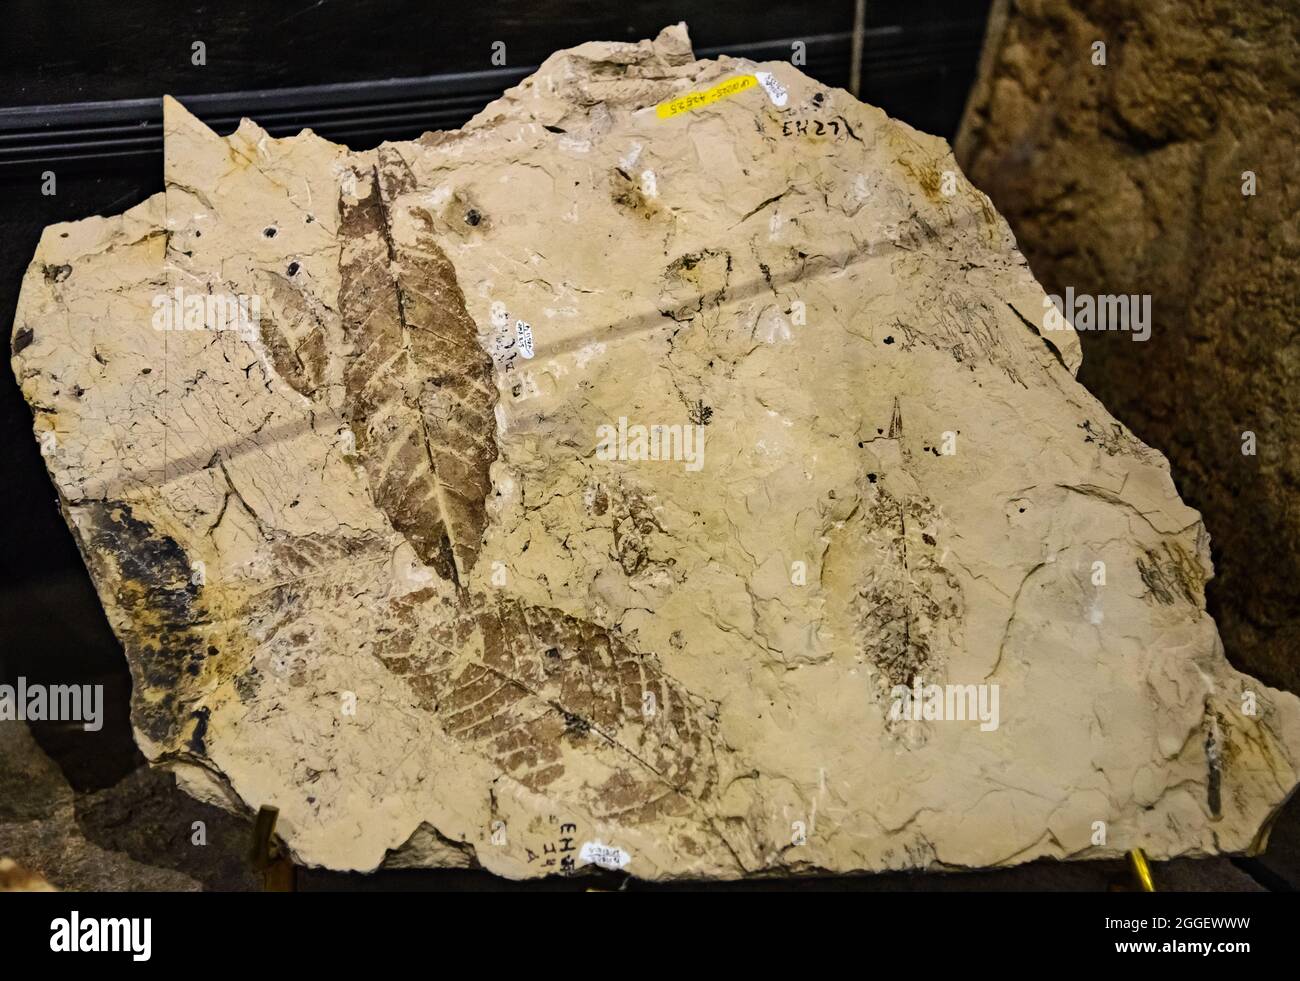 Exhibit of plant leaf fossils (Meliosma sp.) of Eocene age at the John Day Fossil Beds National Monument. Kimberly, Oregon, USA. Stock Photo